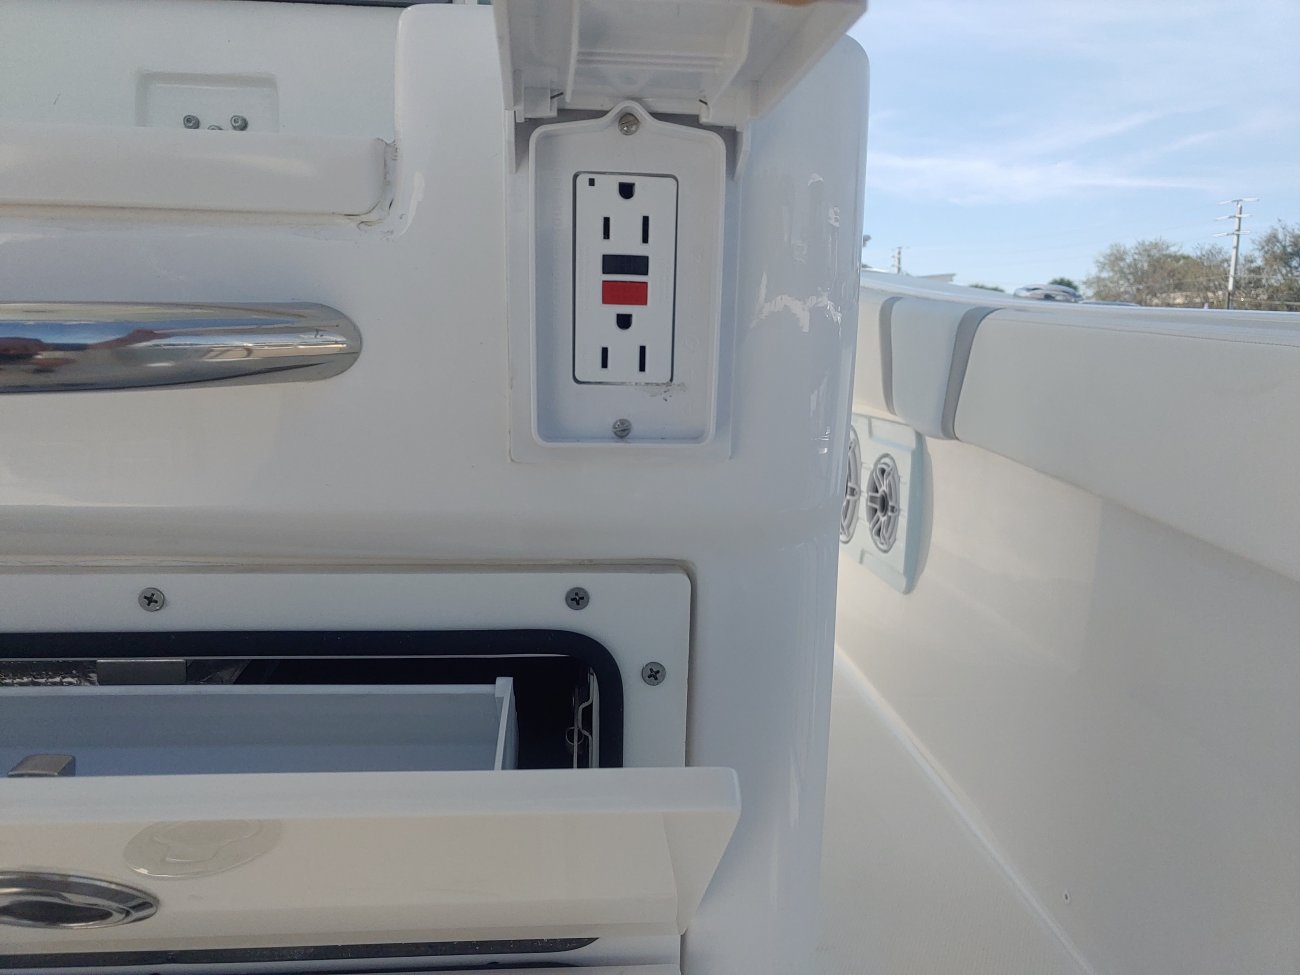 The definition of an outboard motor is a detachable engine mounted on outboard brackets on the stern of your boat.  This configuration will have twin engines.